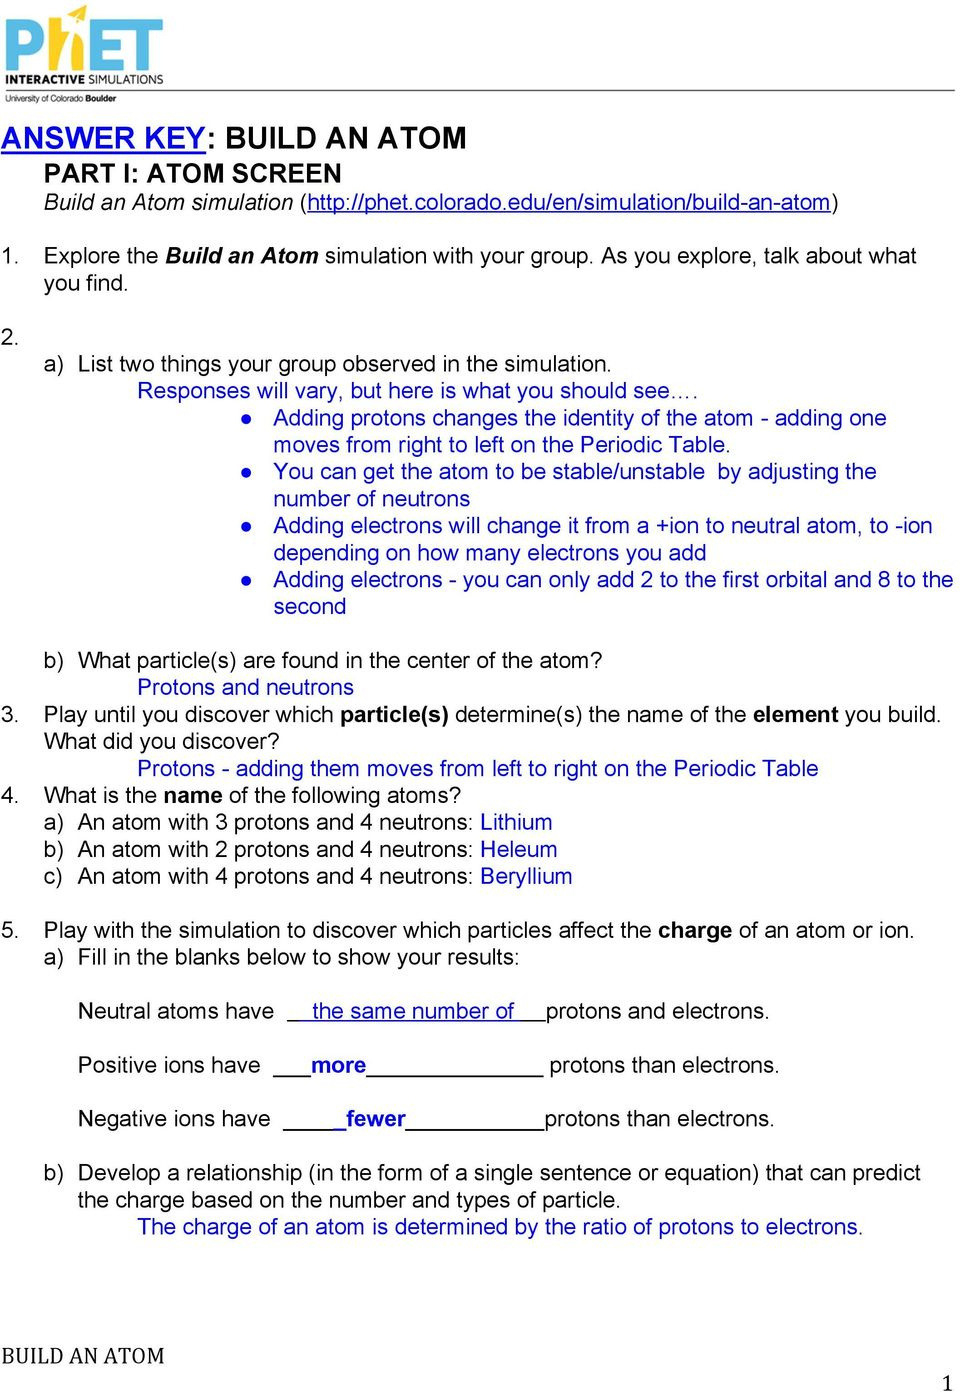 energy-forms-and-changes-simulation-worksheet-answers-db-excel